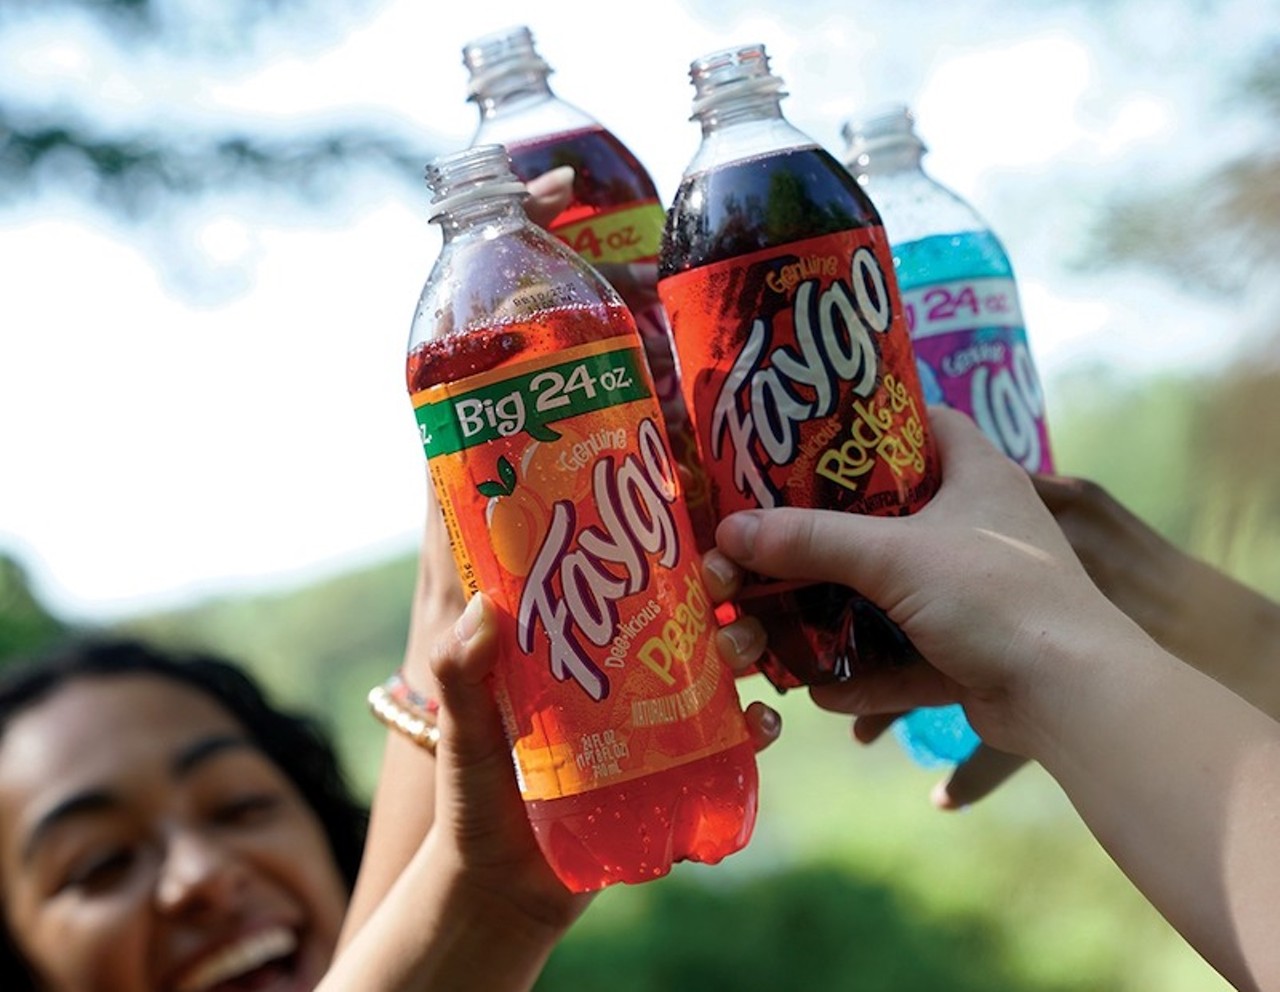 Faygo pop
Born in Detroit in 1907, Faygo has become an iconic symbol of Detroit’s culture. From classics like Redpop to unique flavors such as Cotton Candy, Faygo has since been served up far beyond its hometown.